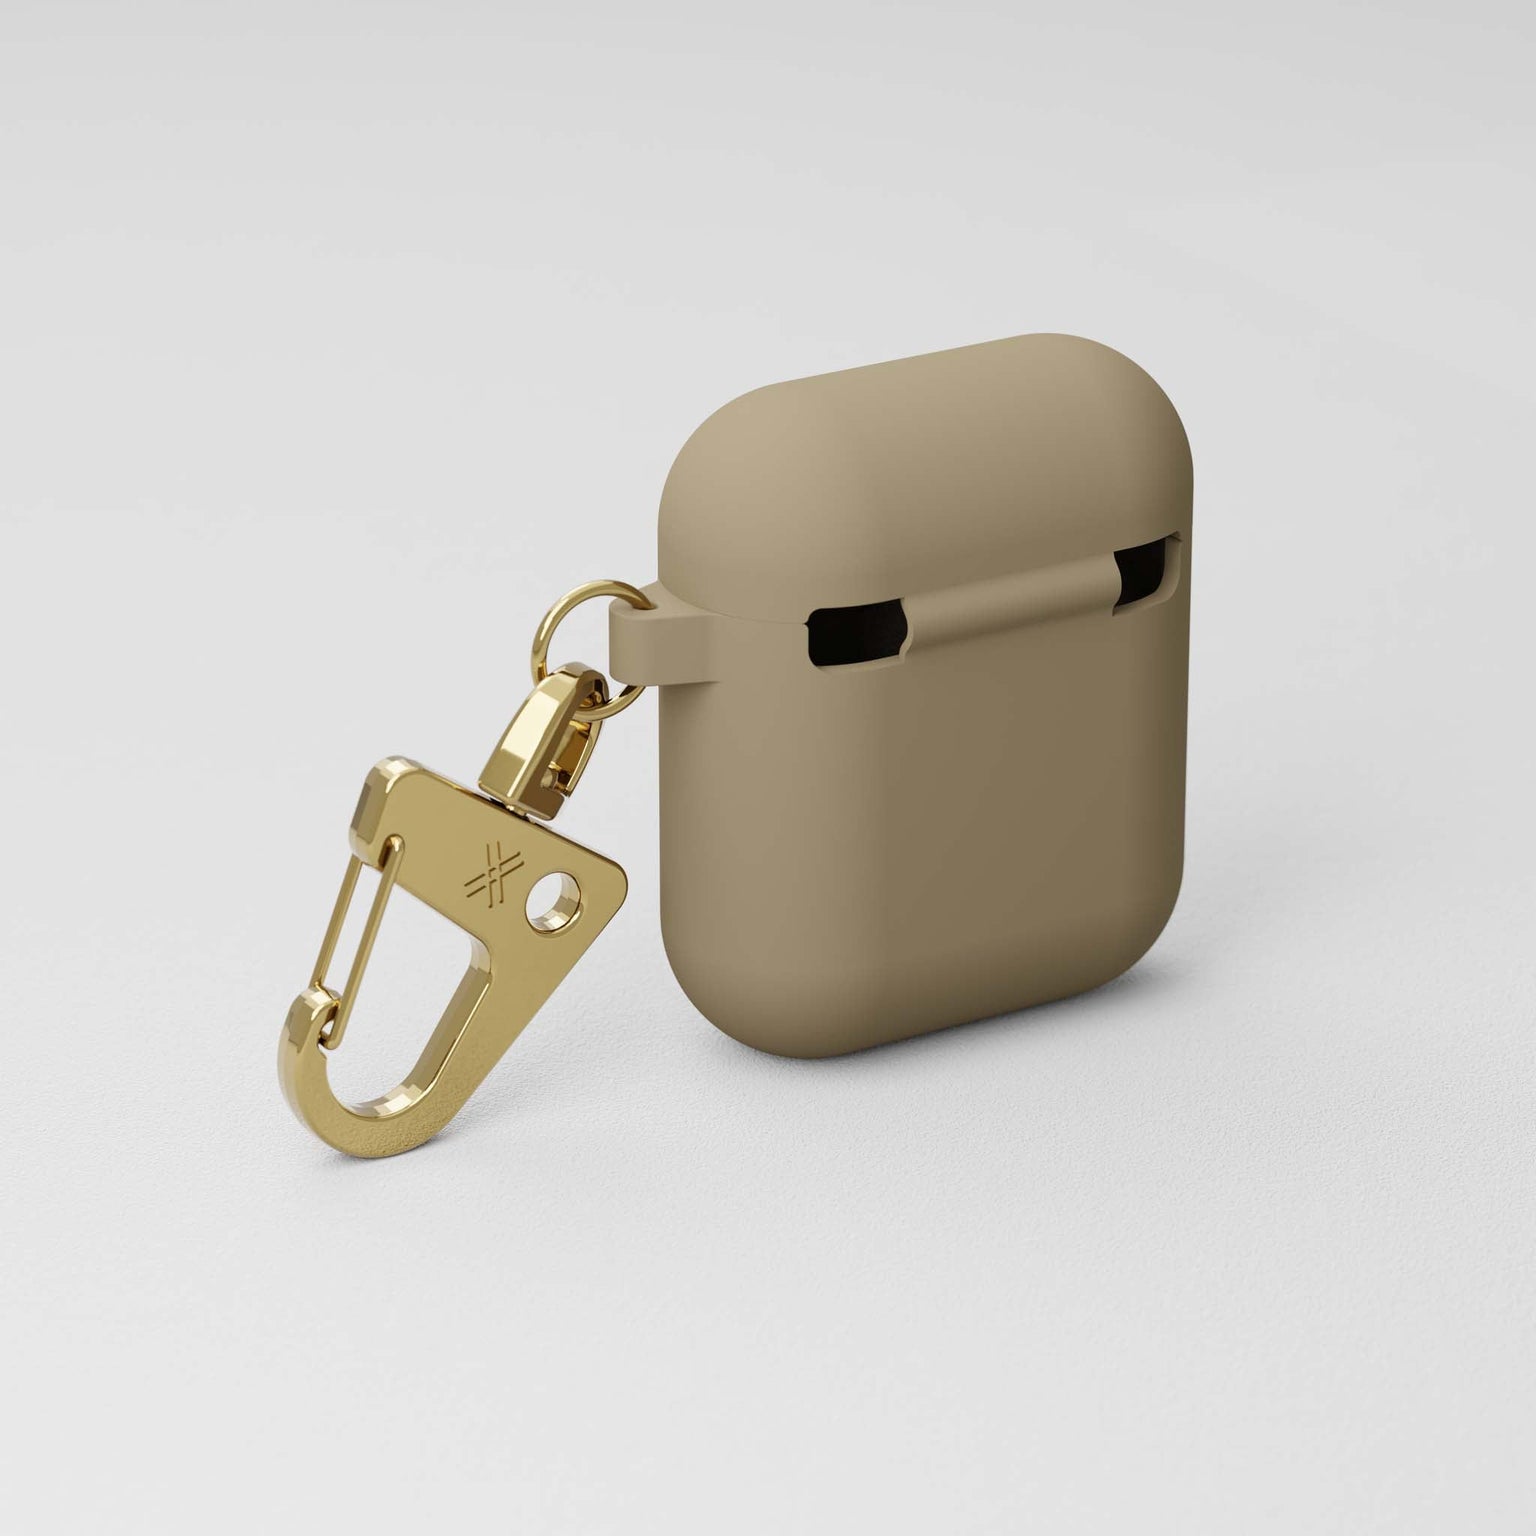 1st & 2nd generation AirPods case in Taupe (Beige) soft-touch and golden metal carabiner | XOUXOU